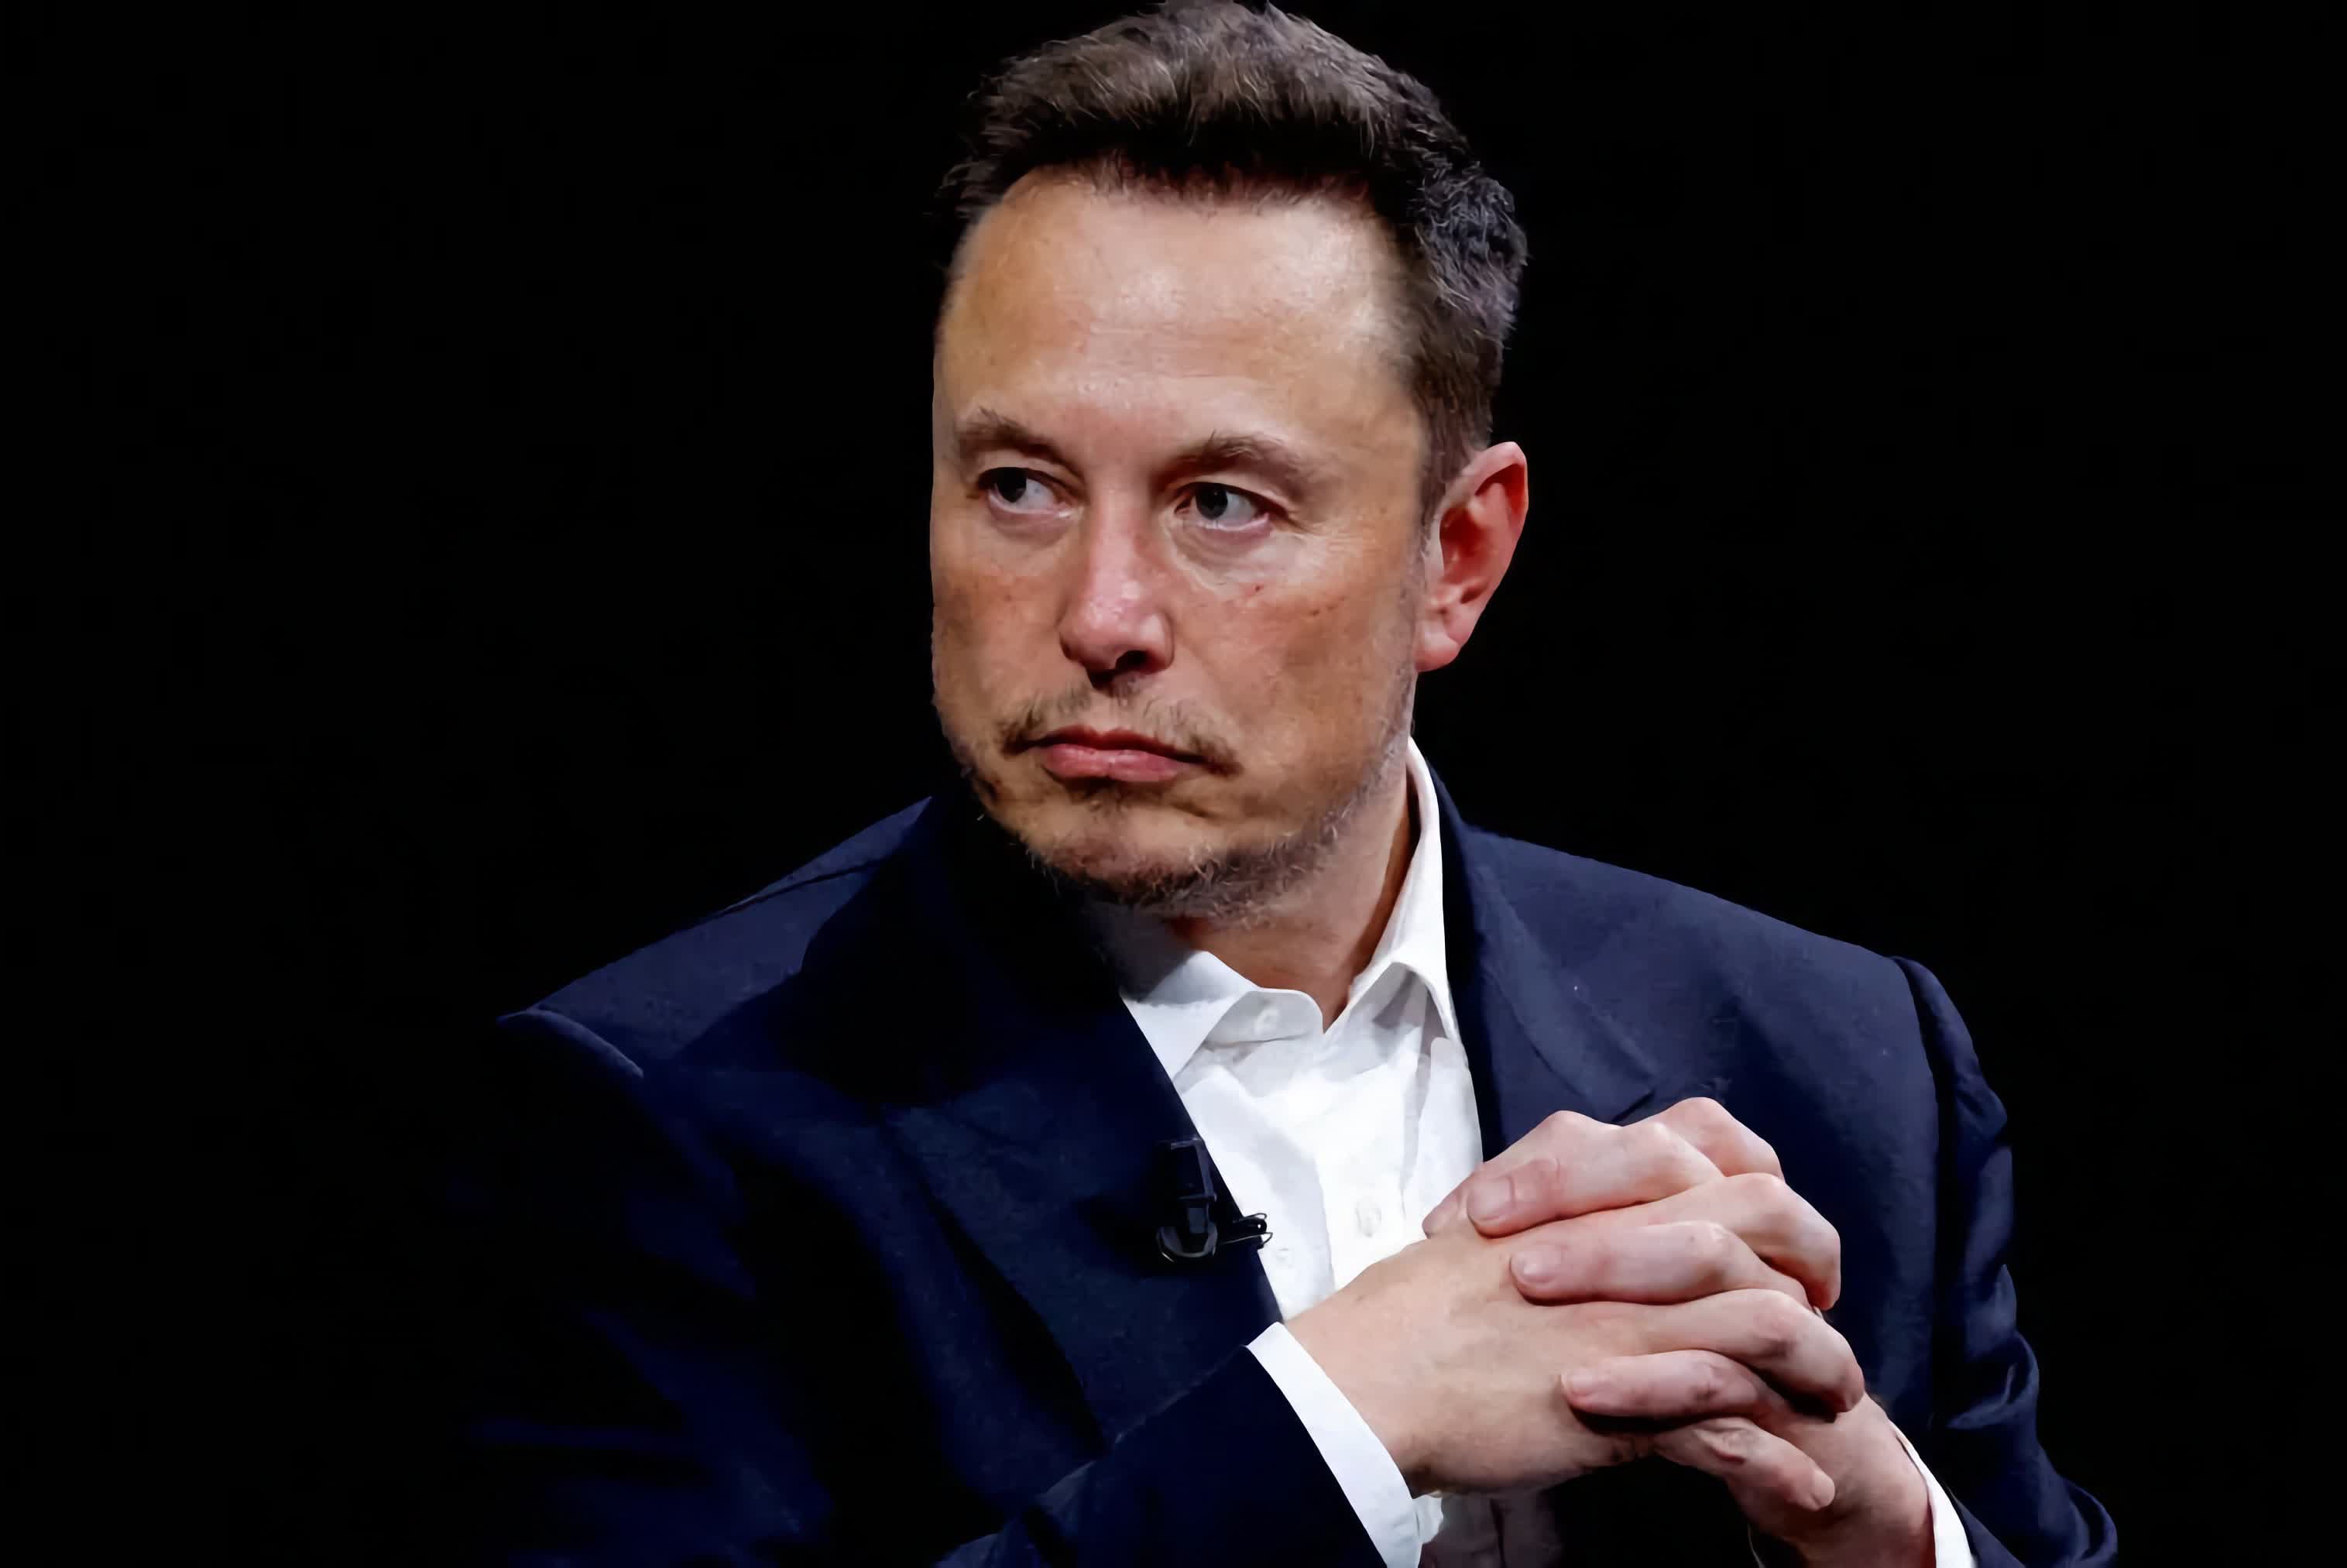 Elon Musk threatens to ban Apple devices at his companies over OpenAI integration